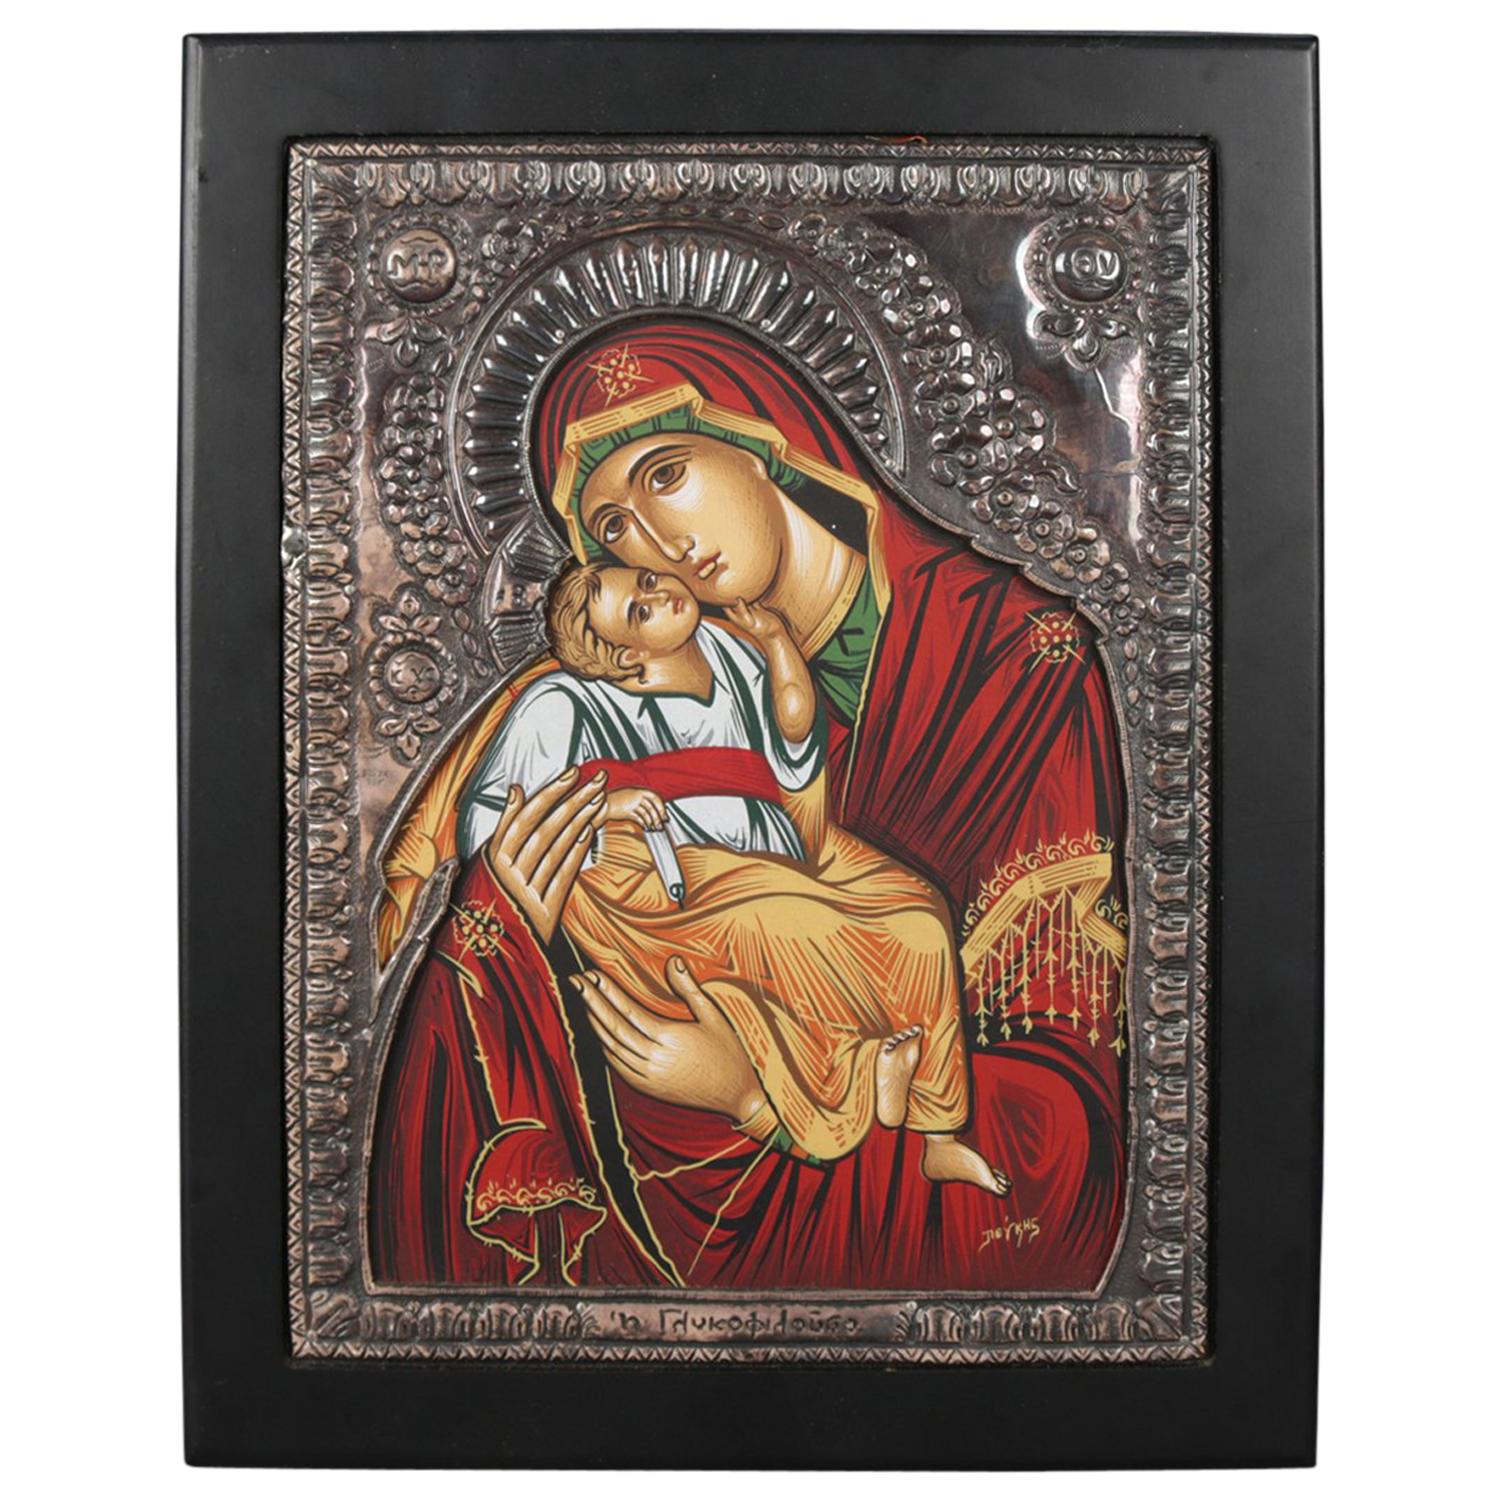 Italian Mother Mary & Christ Child Signed Icon after Padre Pefkis, 20th Century